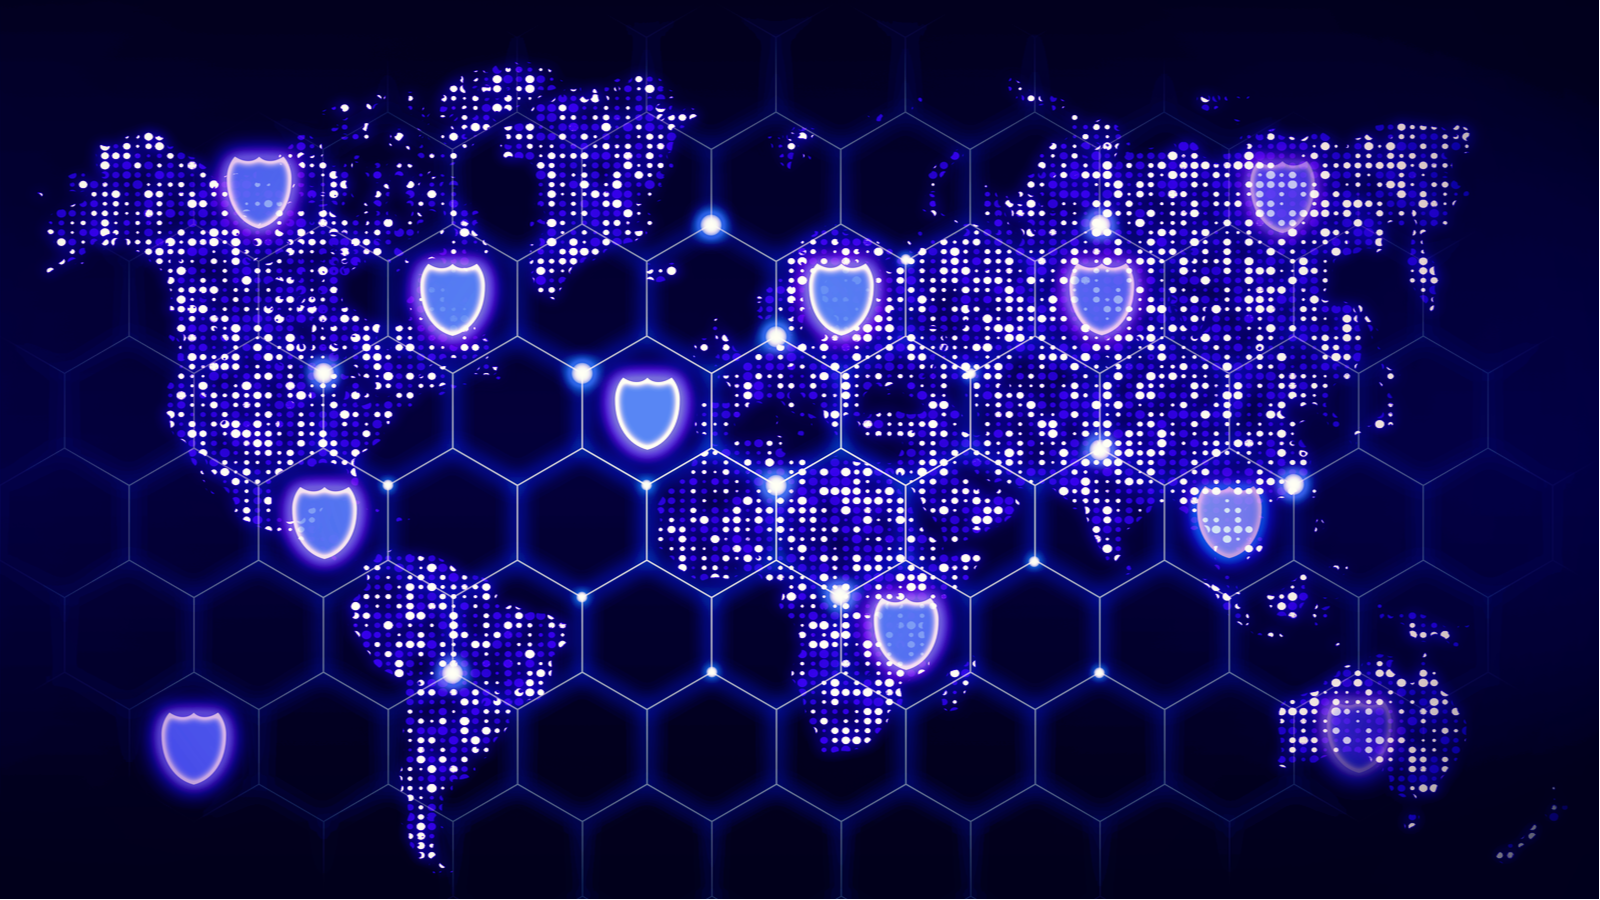 An image of a hexagon network covering the world map with glowing data centers and shield symbols